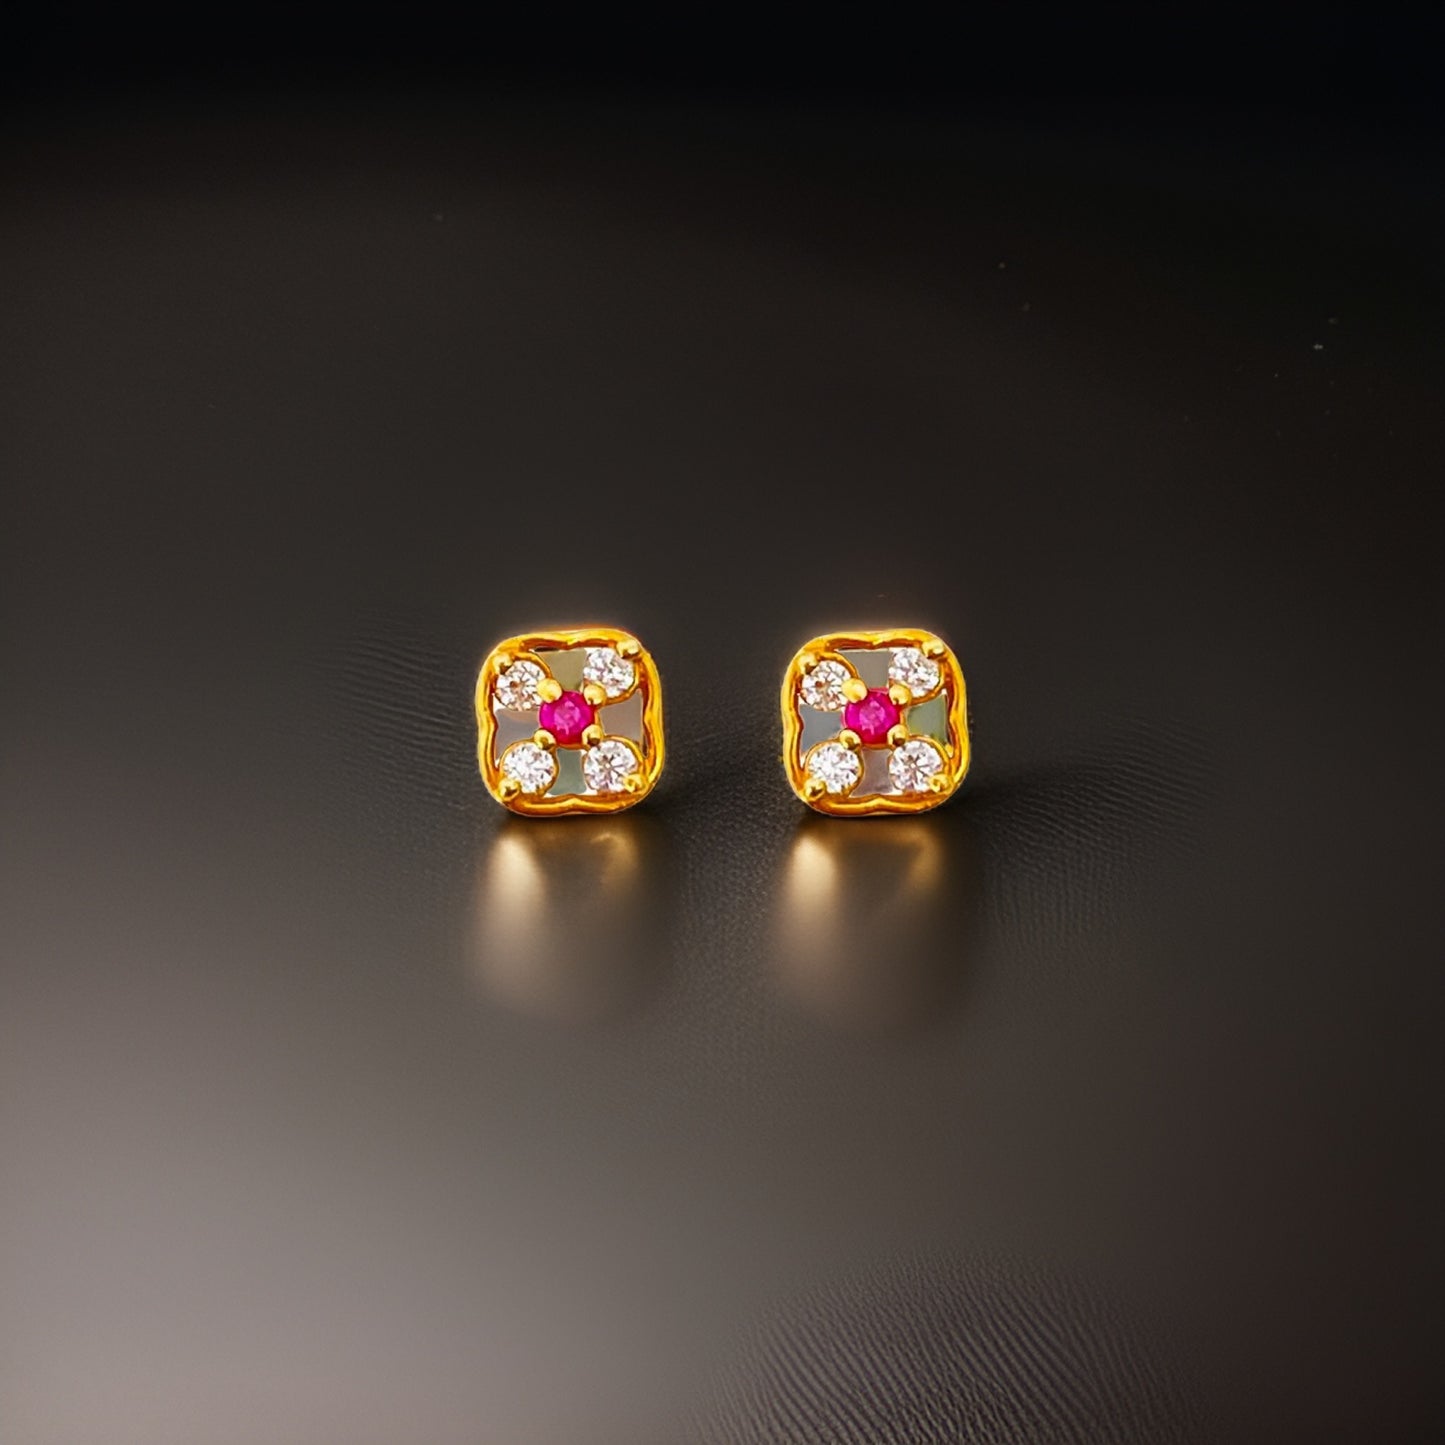 18KT Gold Pink-White Square Stone Stud Earrings.